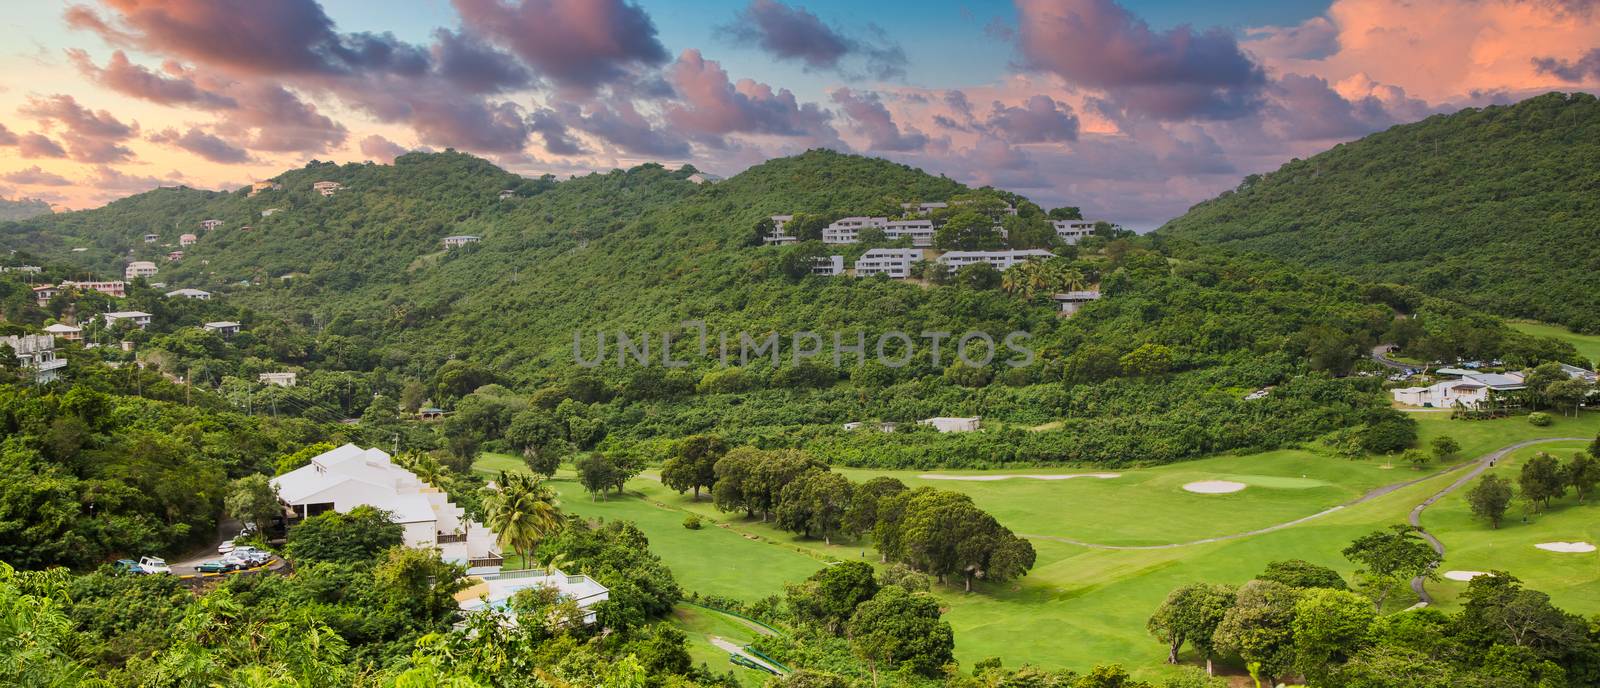 Golf Course on St Thomas at Dusk by dbvirago